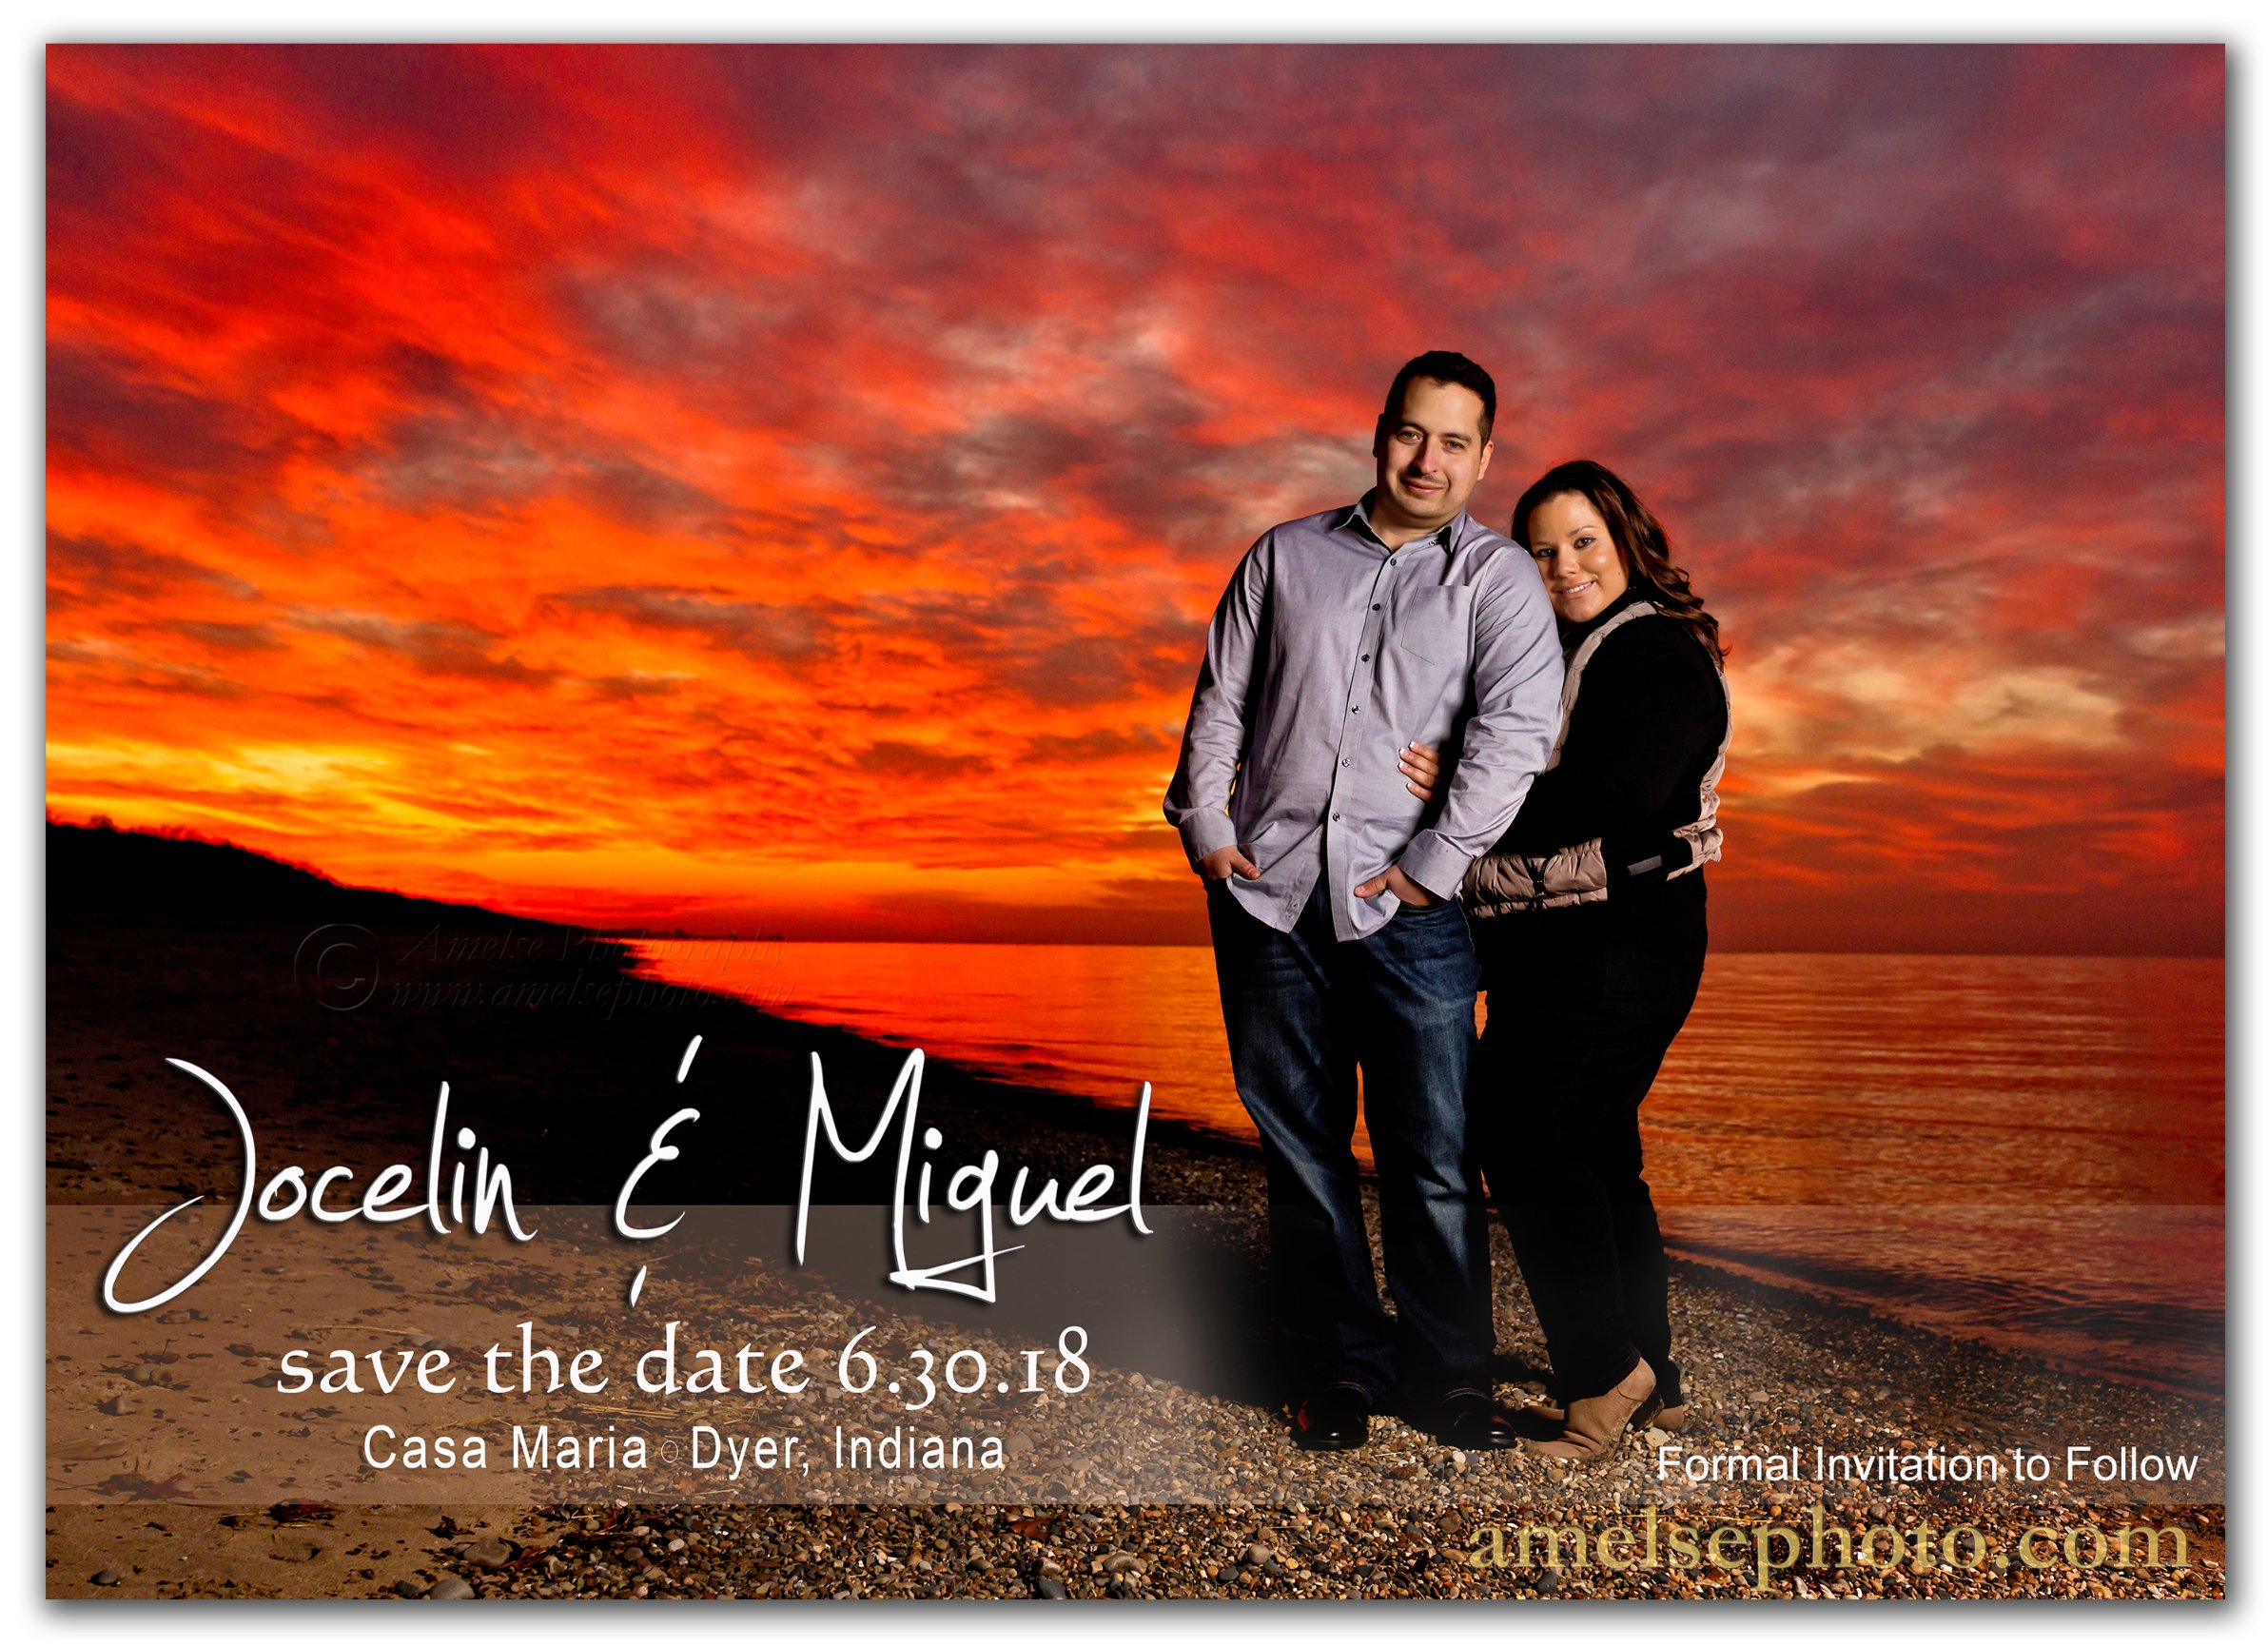 Save The Date Cards Amelse Photography 219 629 9662